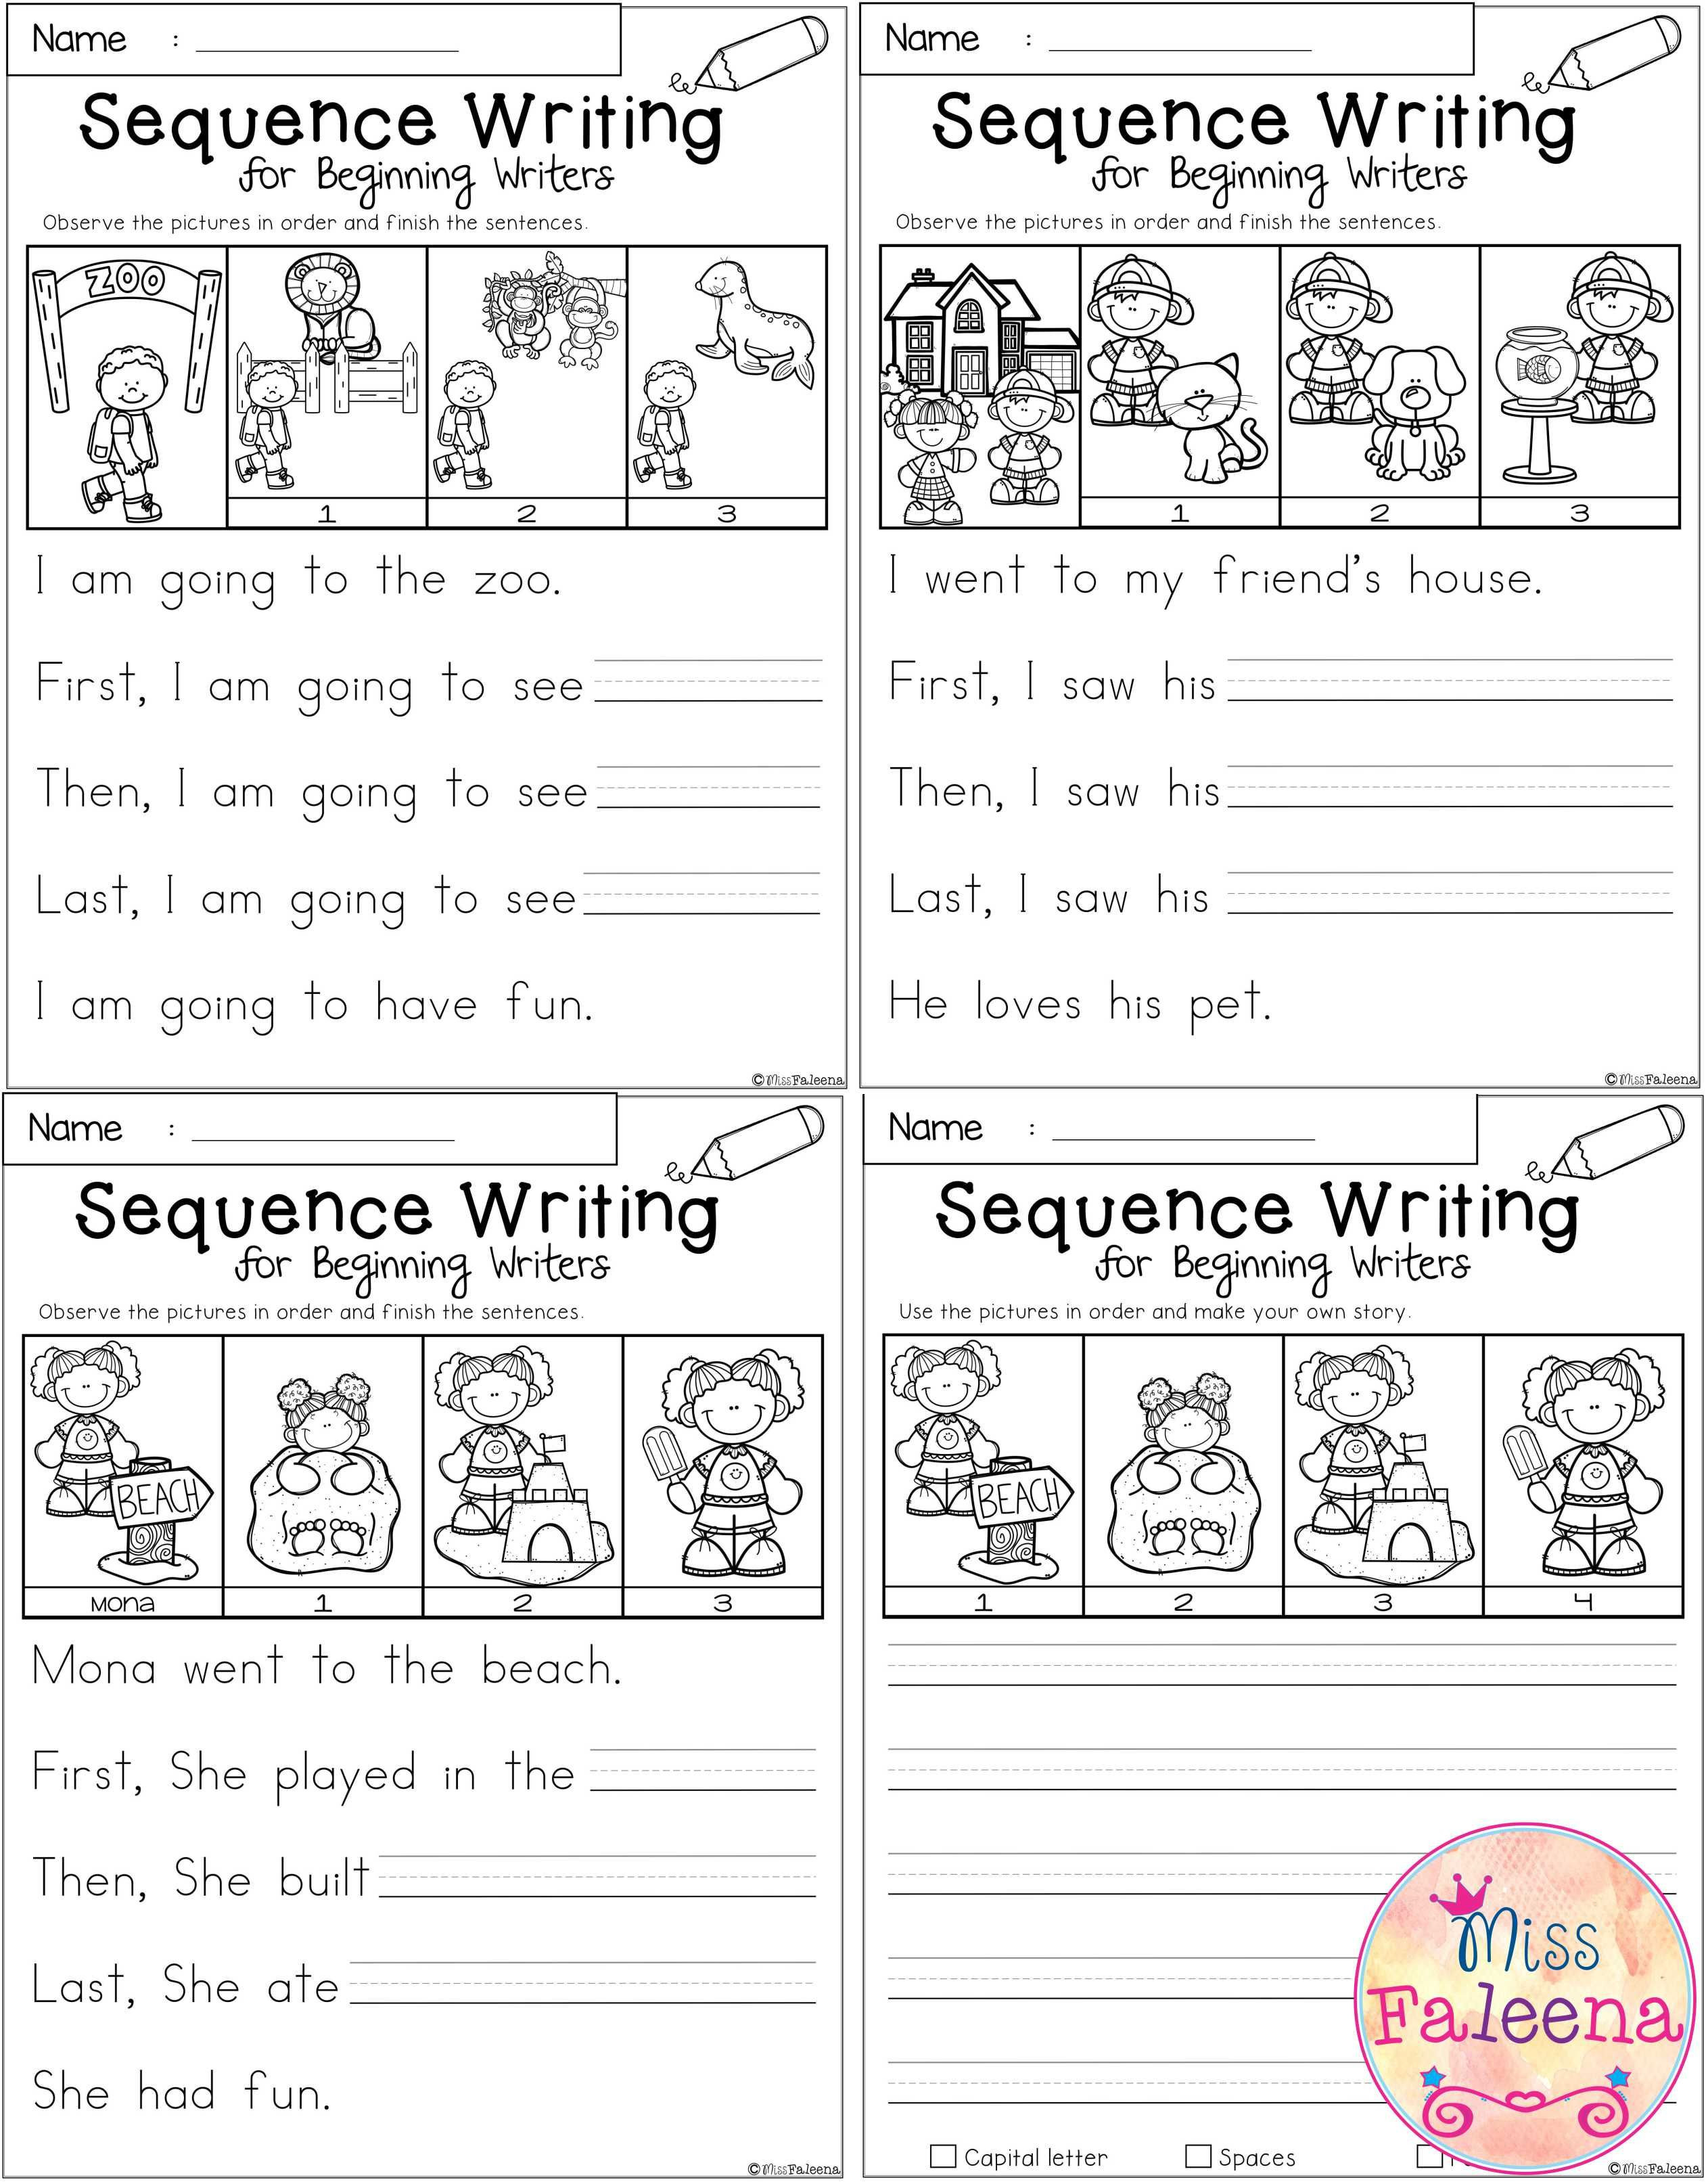 Sequencing Worksheets for 1st Grade Free Sequence Writing for Beginning Writers